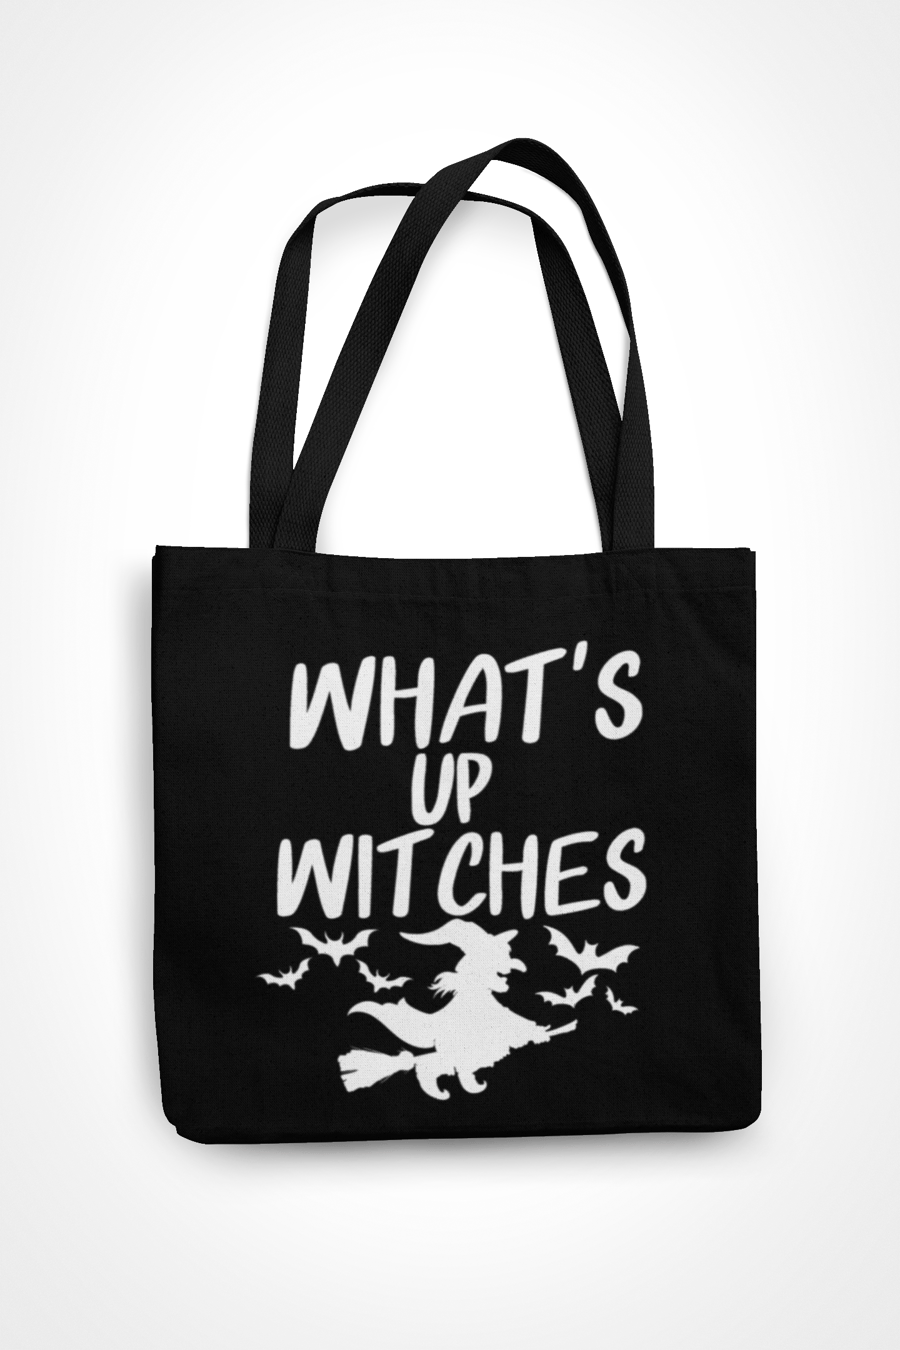 What's Up Witches Tote Bag- Novelty Funny Halloween themed Totebag